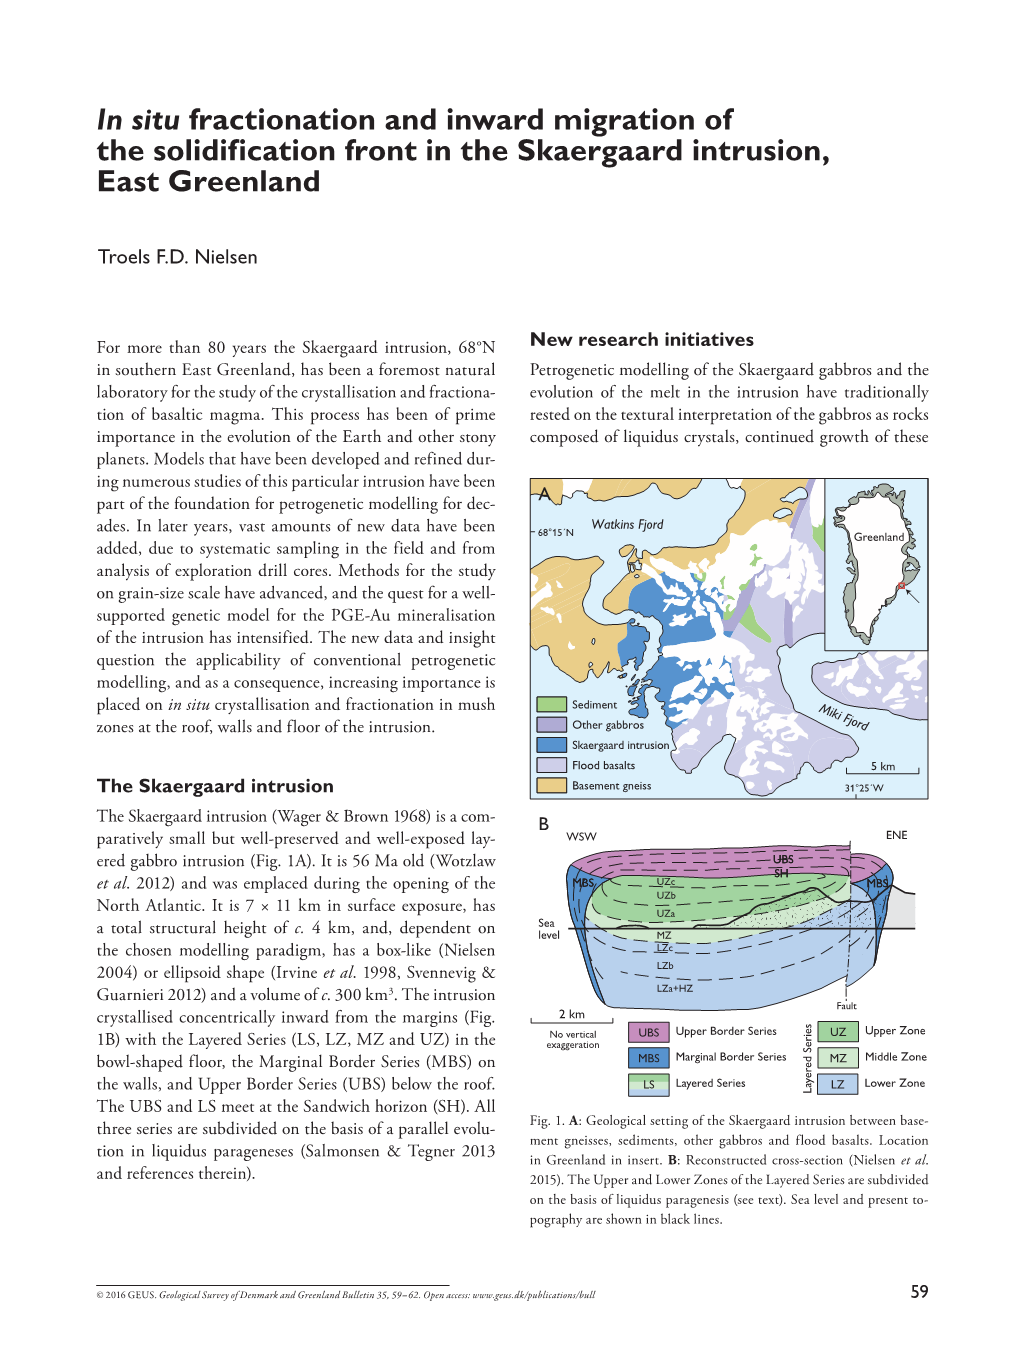 Geological Survey of Denmark and Greenland Bulletin 35, 2016, 59-62